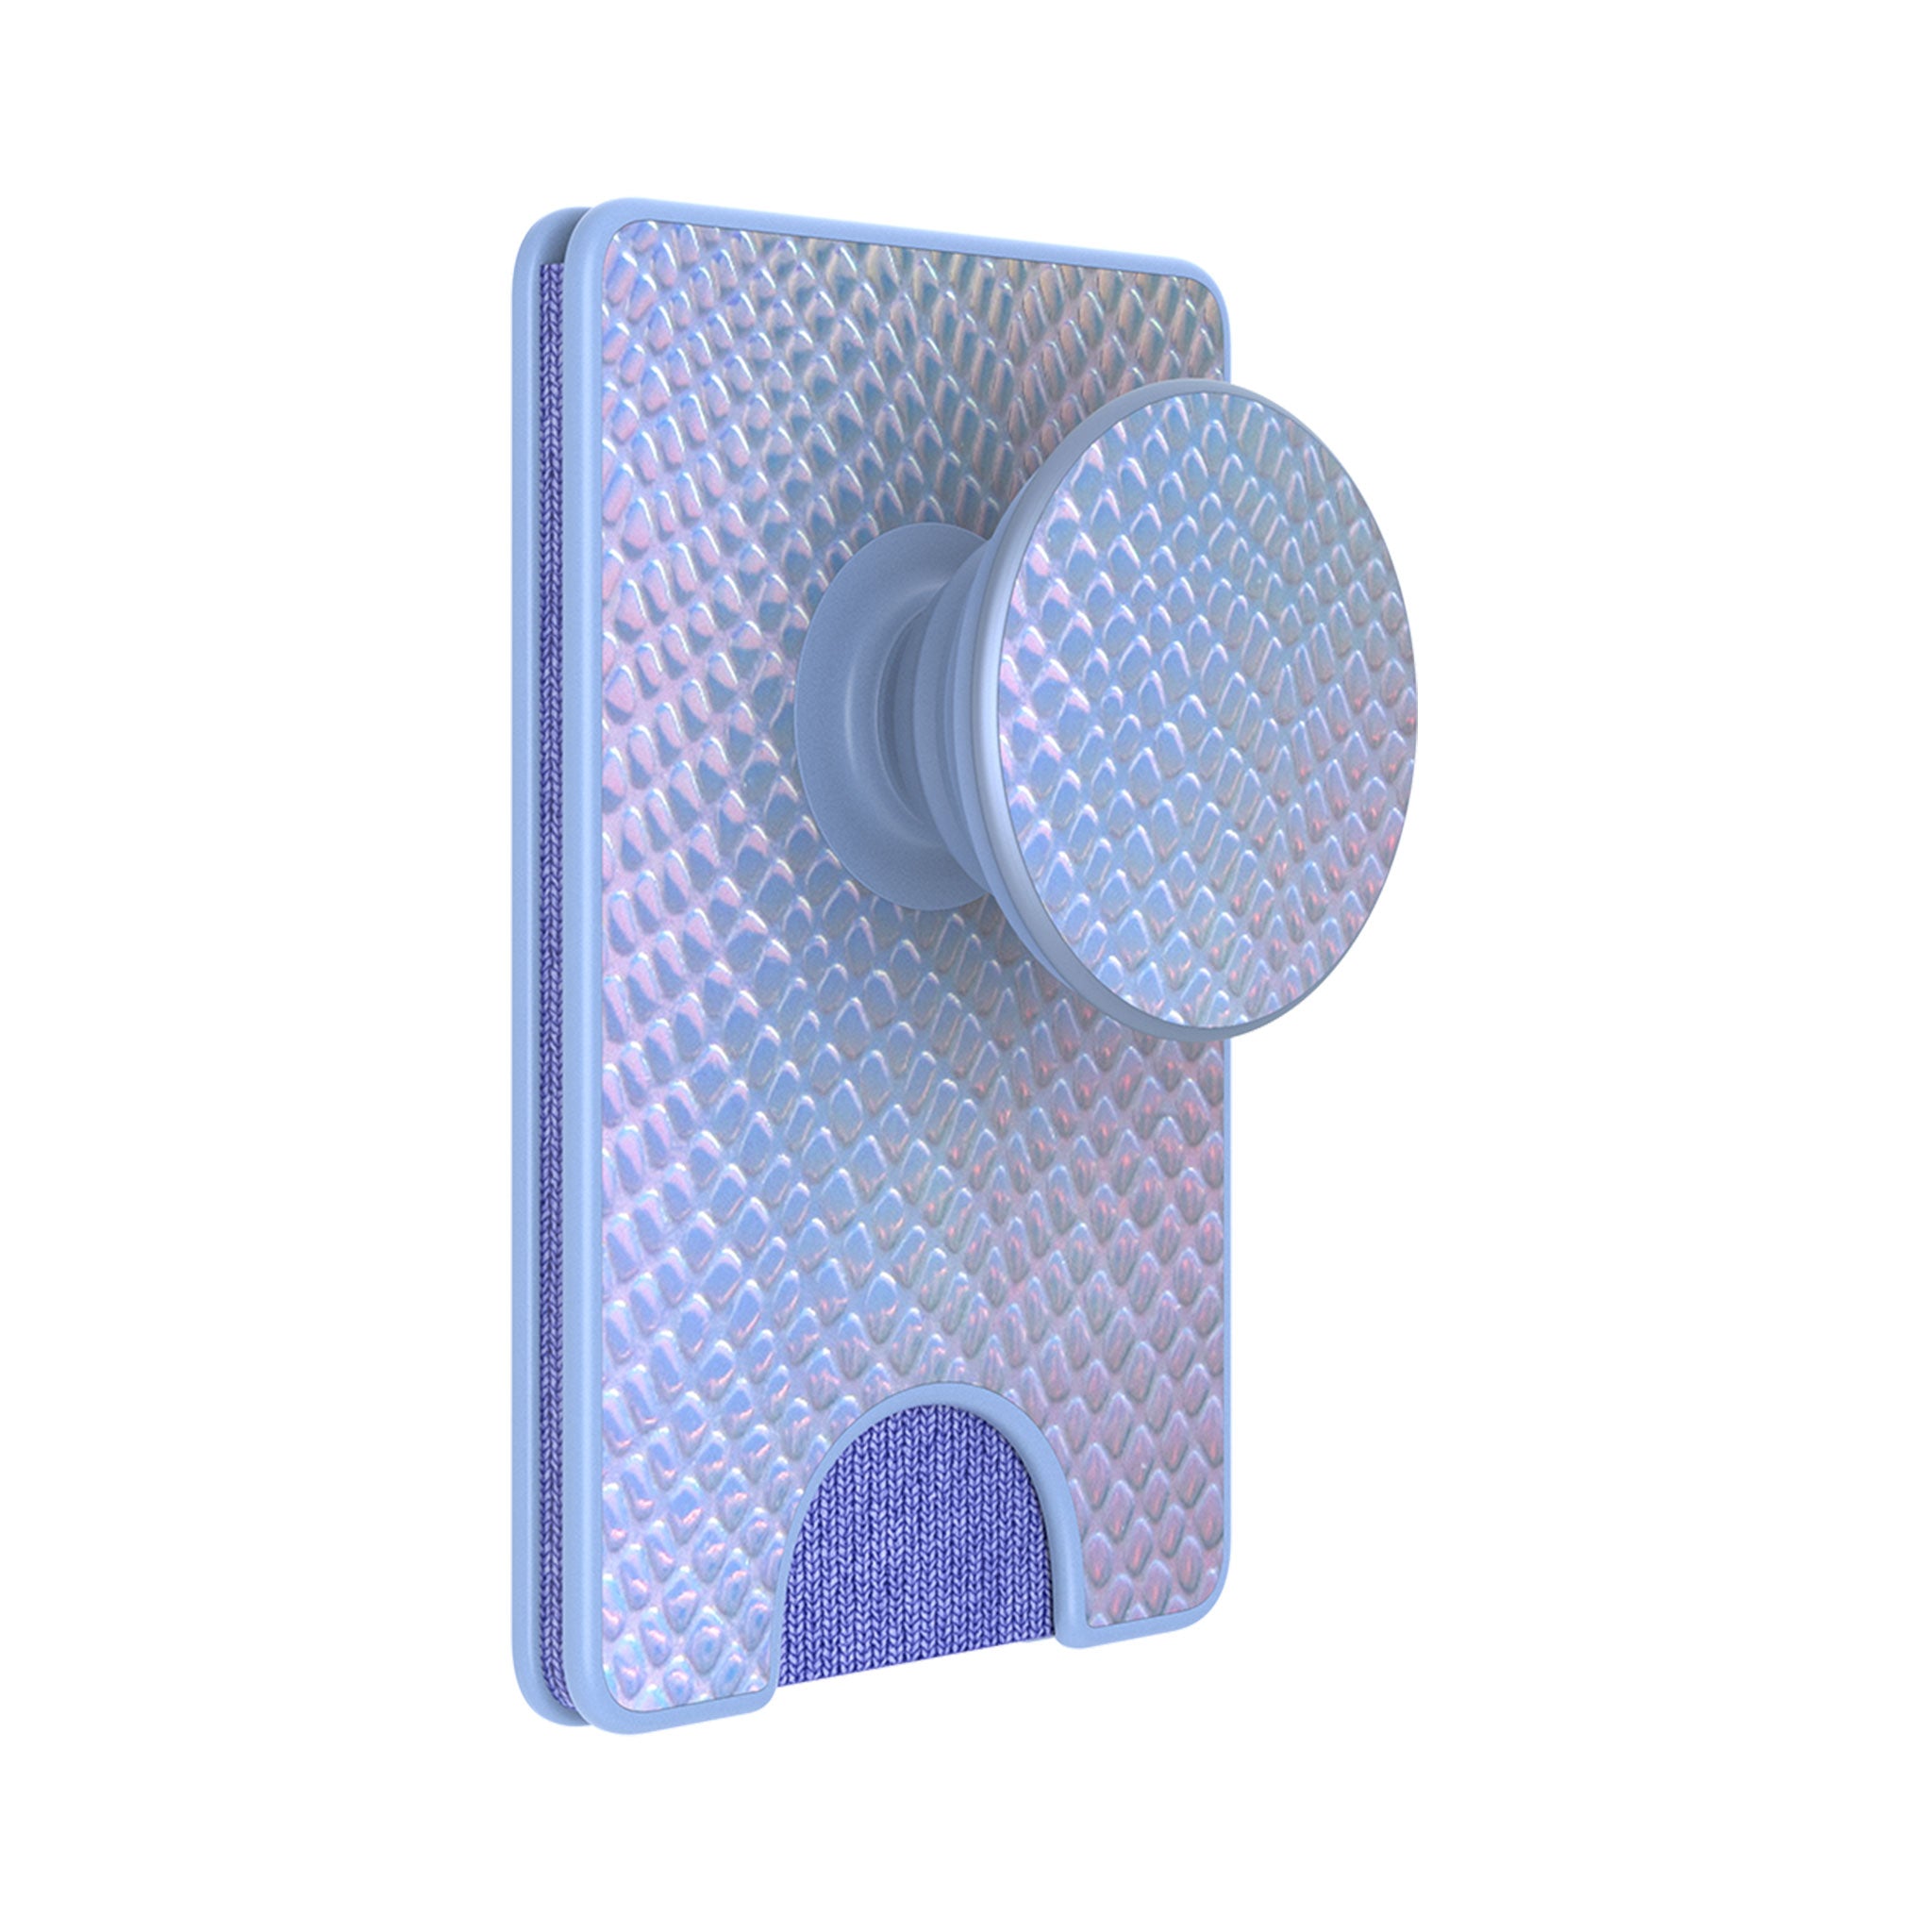 Popsockets - Popwallet Plus With Popgrip - Iridescent Snake